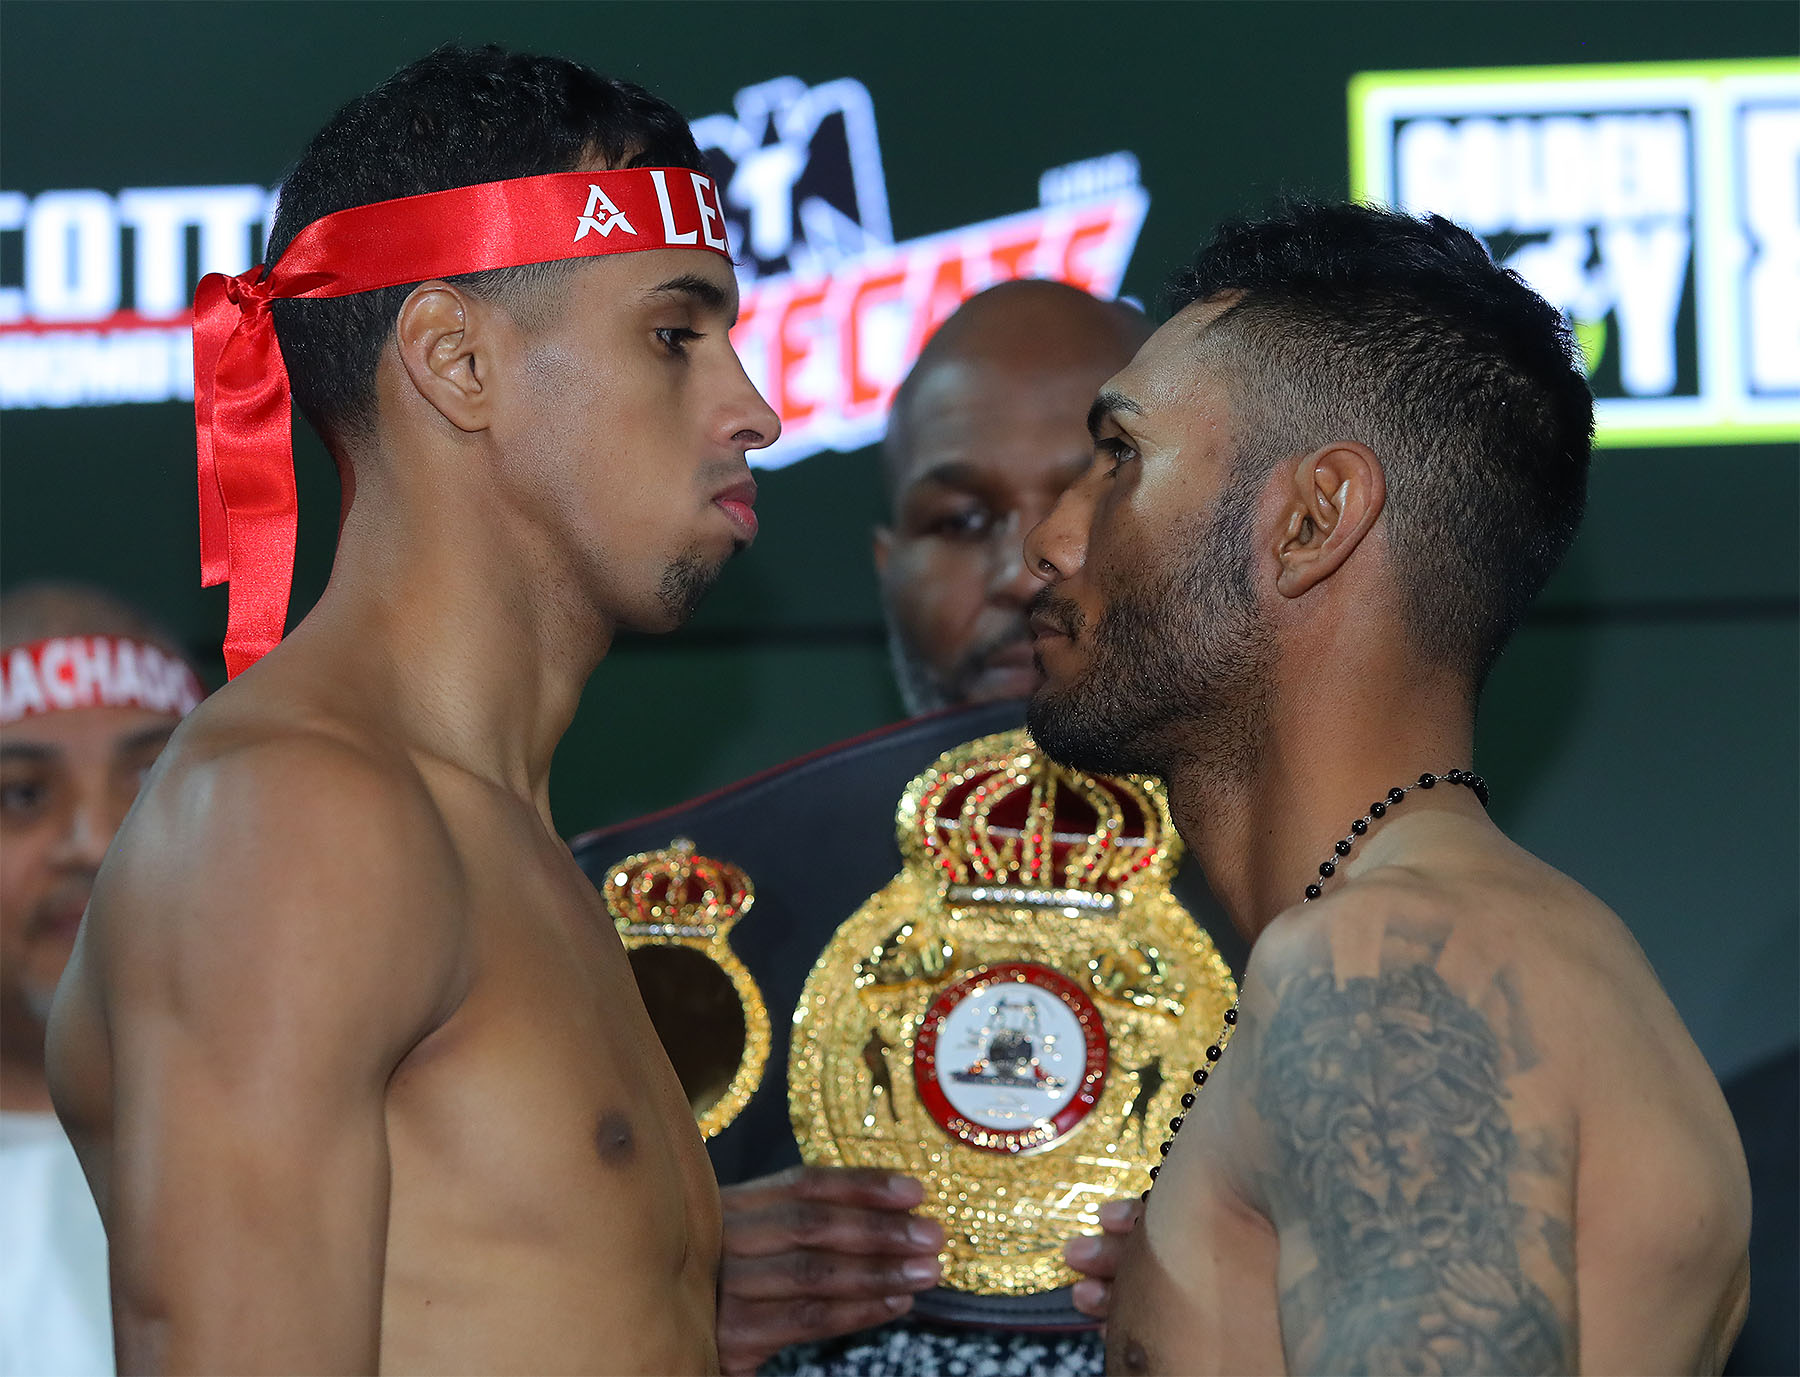 The highly-anticipated rematch between Andrew Cancio and Alberto Machado will take place on June 21, 2019 from the Fantasy Springs Resort Casino and stream live on DAZN.